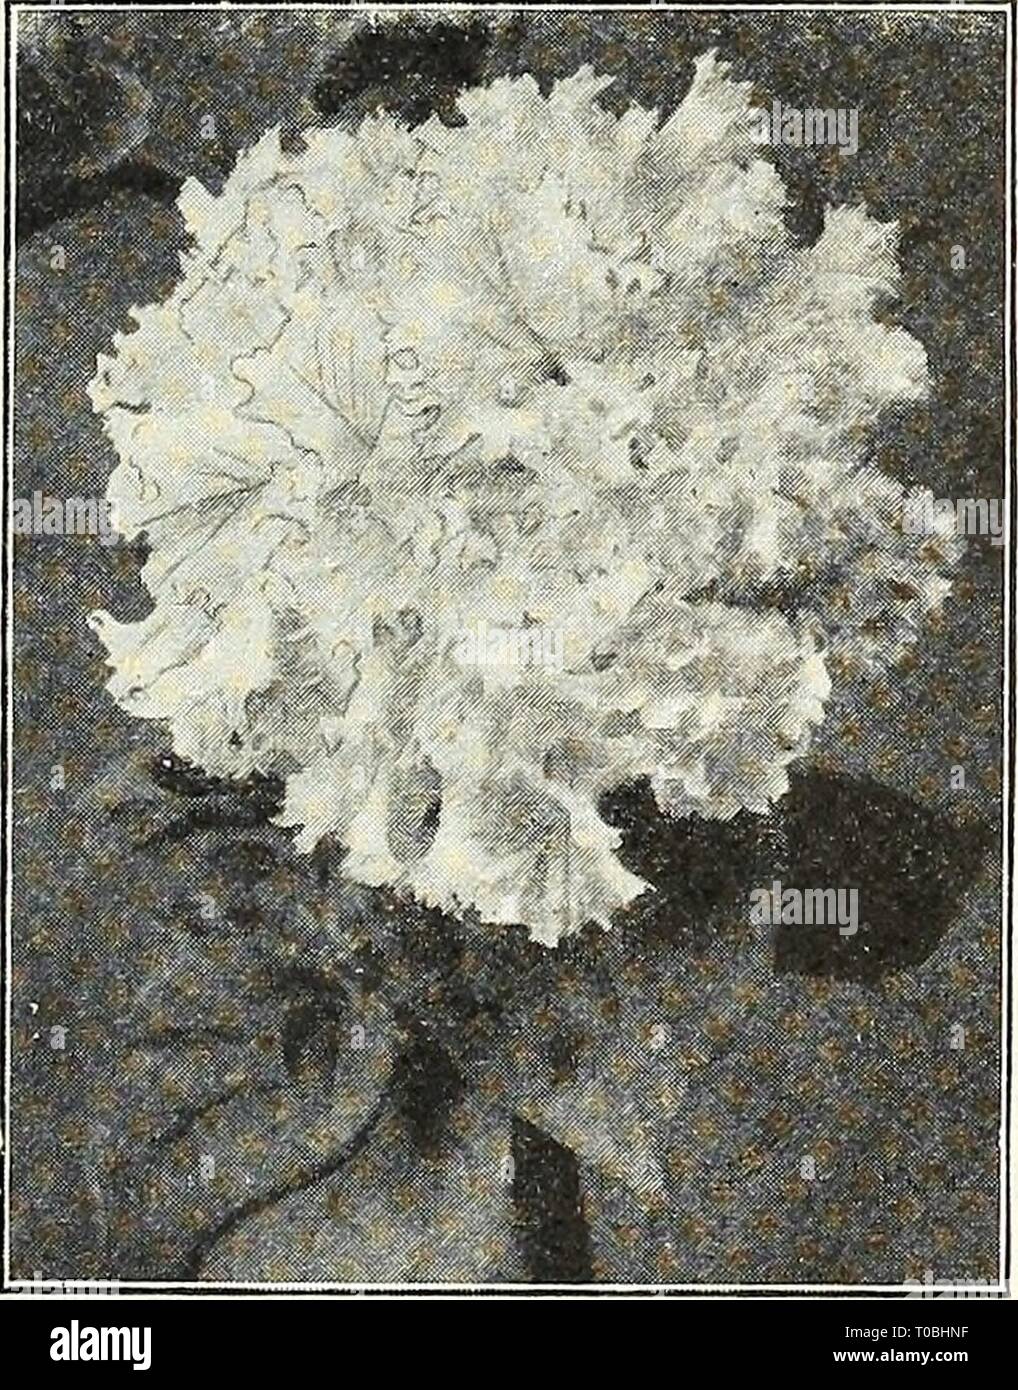 Dreer's garden book 1924 (1924) Dreer's garden book 1924 dreersgardenbook1924henr Year: 1924  Balcony Petumias 50 35    Dreer's Superb Double-fringed Petunla. Balcony Petunias A splendid large and free flowering type either for window boxes, vases, hanging baskets, etc , the flowers average 3 inches across and make a very effective display over a long season. (See cut.) PER PKT. 3555 Balcony Blue. Velvety indigo blue $0 20 3556 Balcony Rose. Brilliant rose-pink; very effective 20 3557 Balcony White. The pure white form 20 3558 Balcony Crimson. Rich velvety crimson 20 A packet each of the above Stock Photo